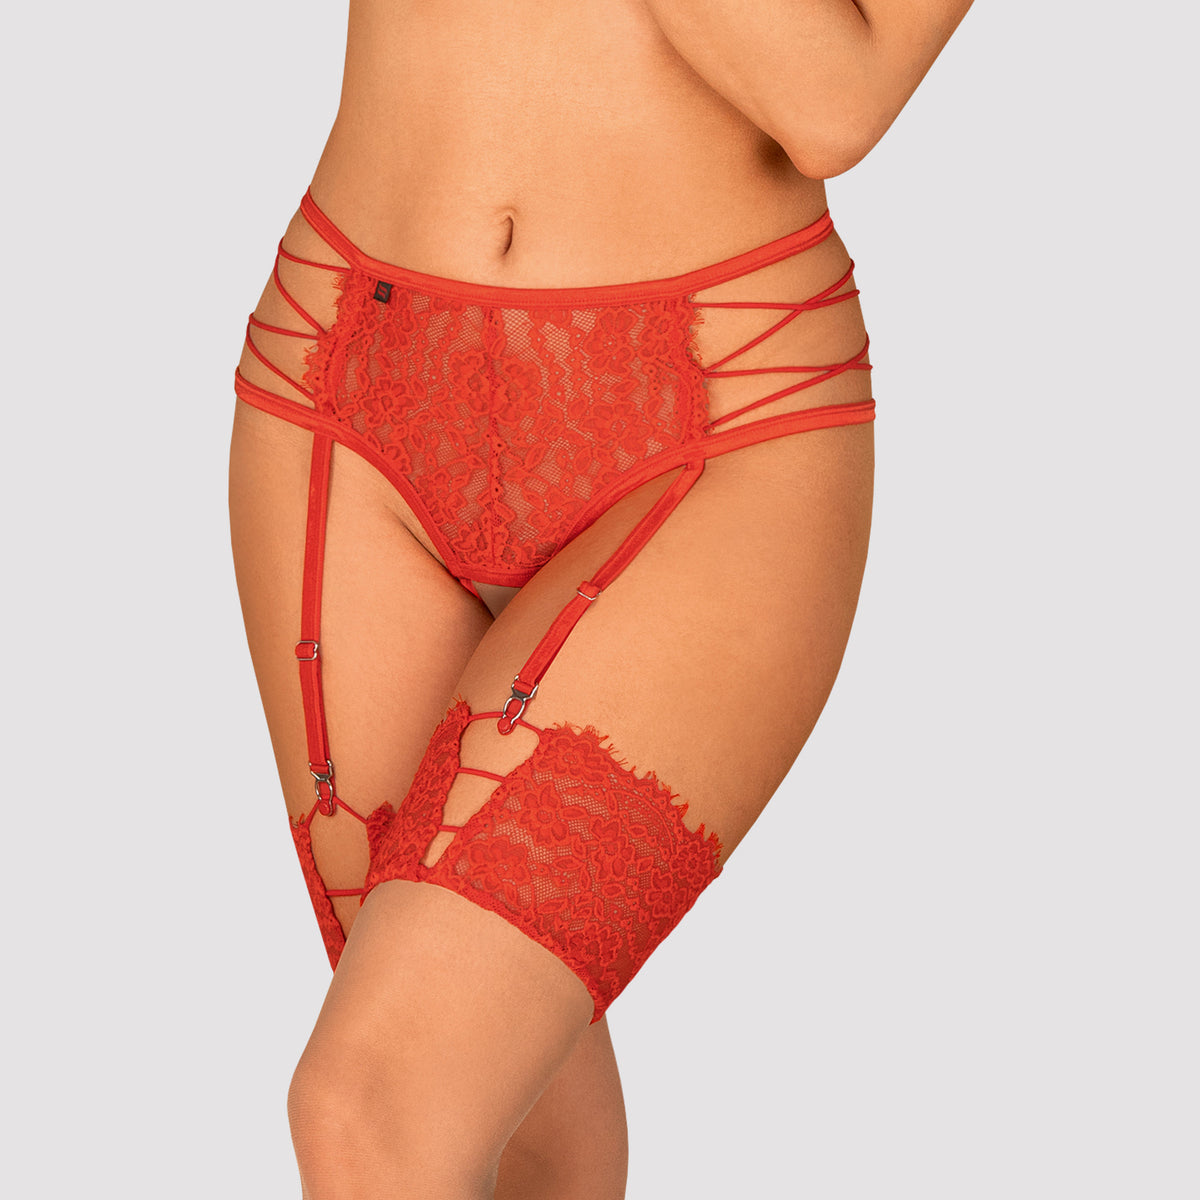 Sexy Crotchless Panty Garter Belt Obsessive Rediosa Red Lavinia Lingerie